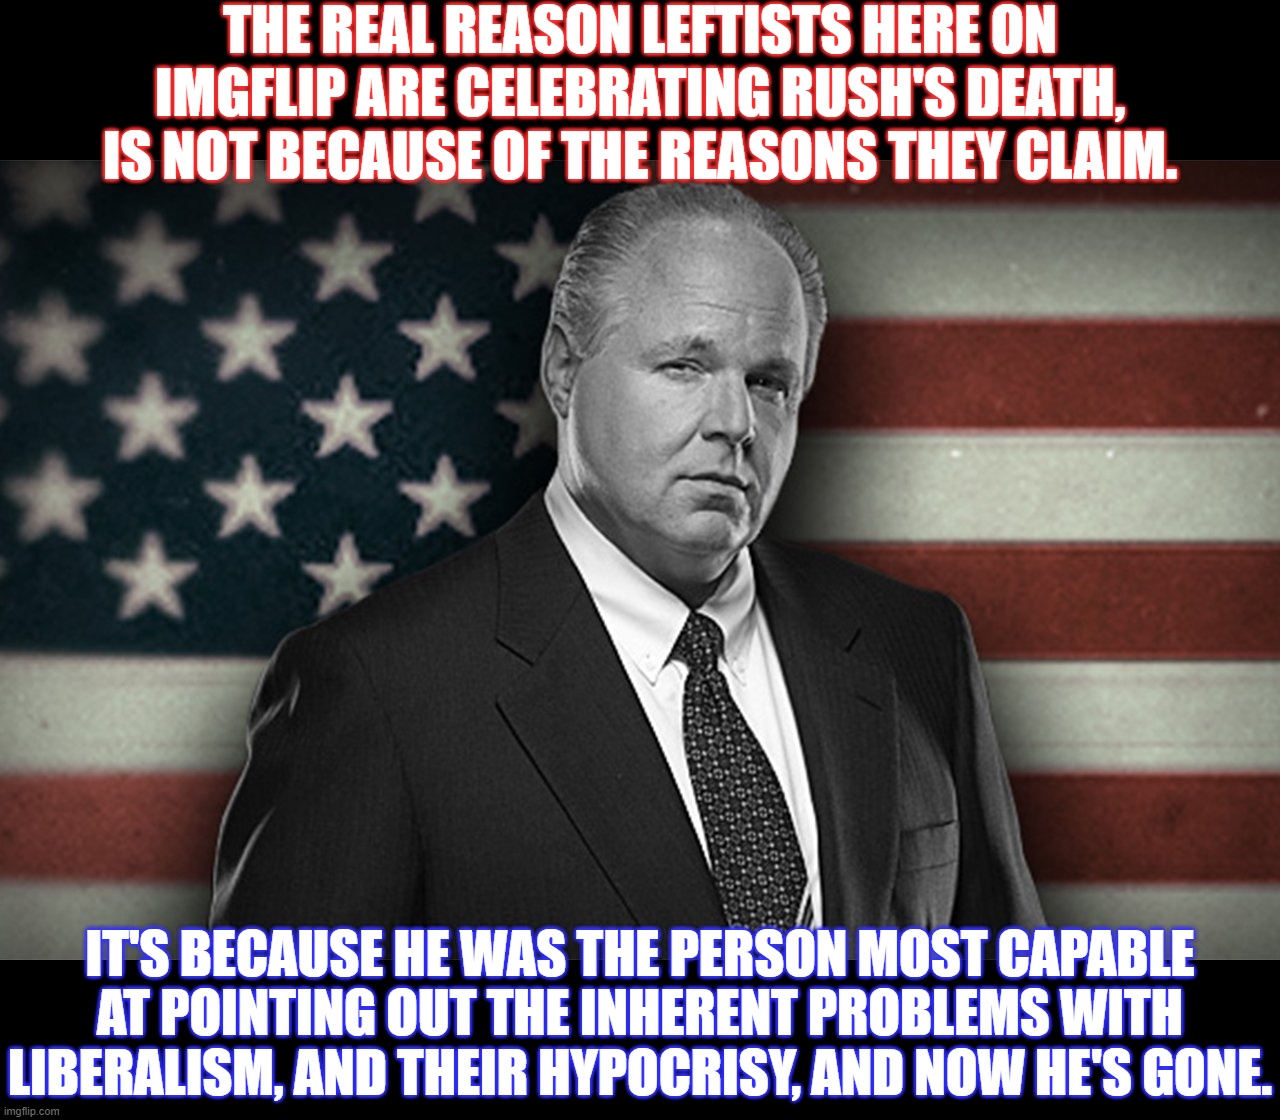 RIP, Rush.  Who will step up and take your place? | THE REAL REASON LEFTISTS HERE ON IMGFLIP ARE CELEBRATING RUSH'S DEATH, IS NOT BECAUSE OF THE REASONS THEY CLAIM. IT'S BECAUSE HE WAS THE PERSON MOST CAPABLE AT POINTING OUT THE INHERENT PROBLEMS WITH LIBERALISM, AND THEIR HYPOCRISY, AND NOW HE'S GONE. | image tagged in rush,rush limbaugh,patriot | made w/ Imgflip meme maker